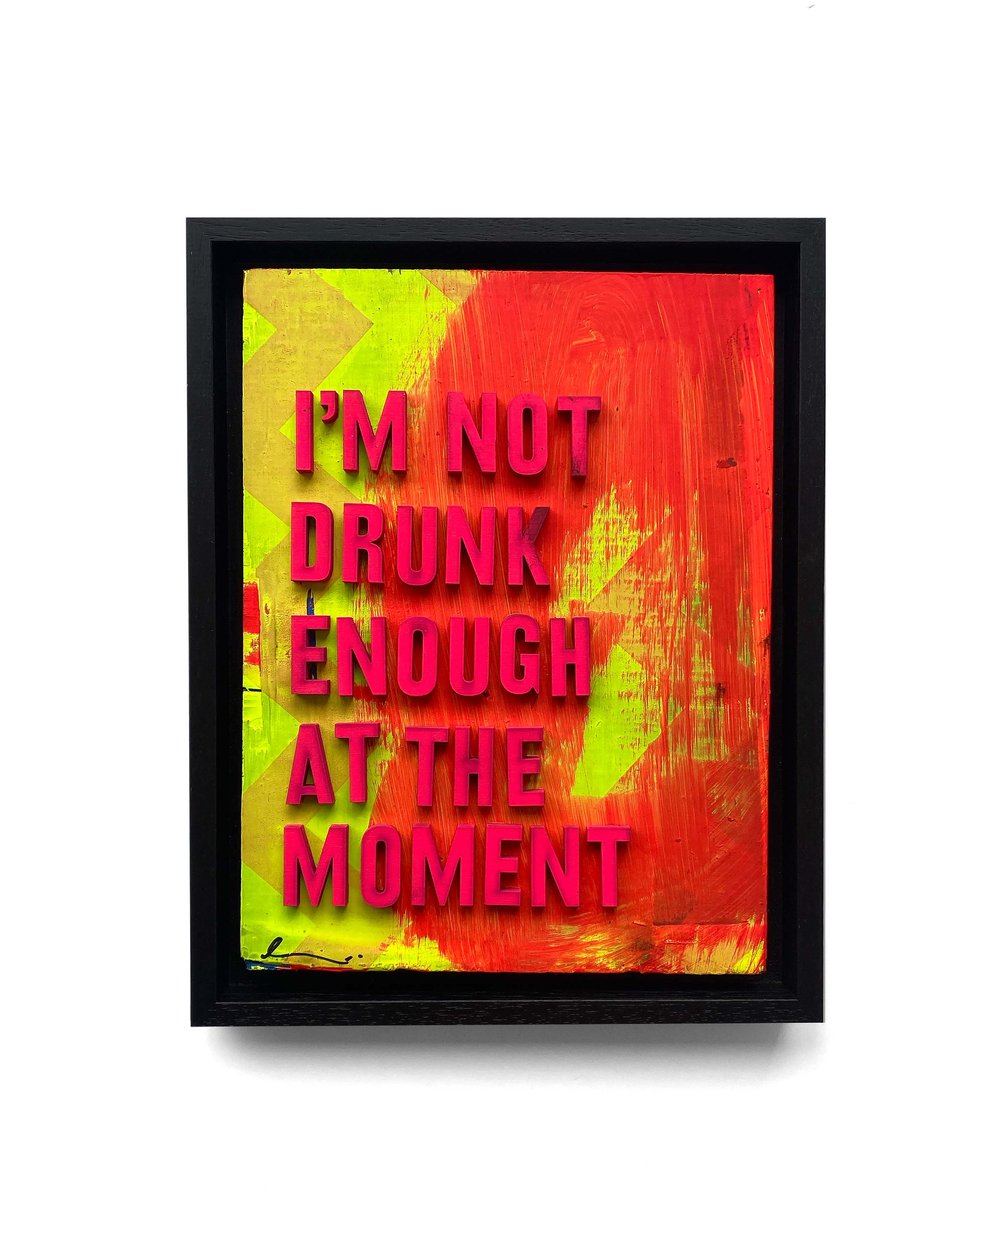 Image of 'I'm not drunk enough at the moment' by Hackney Dave